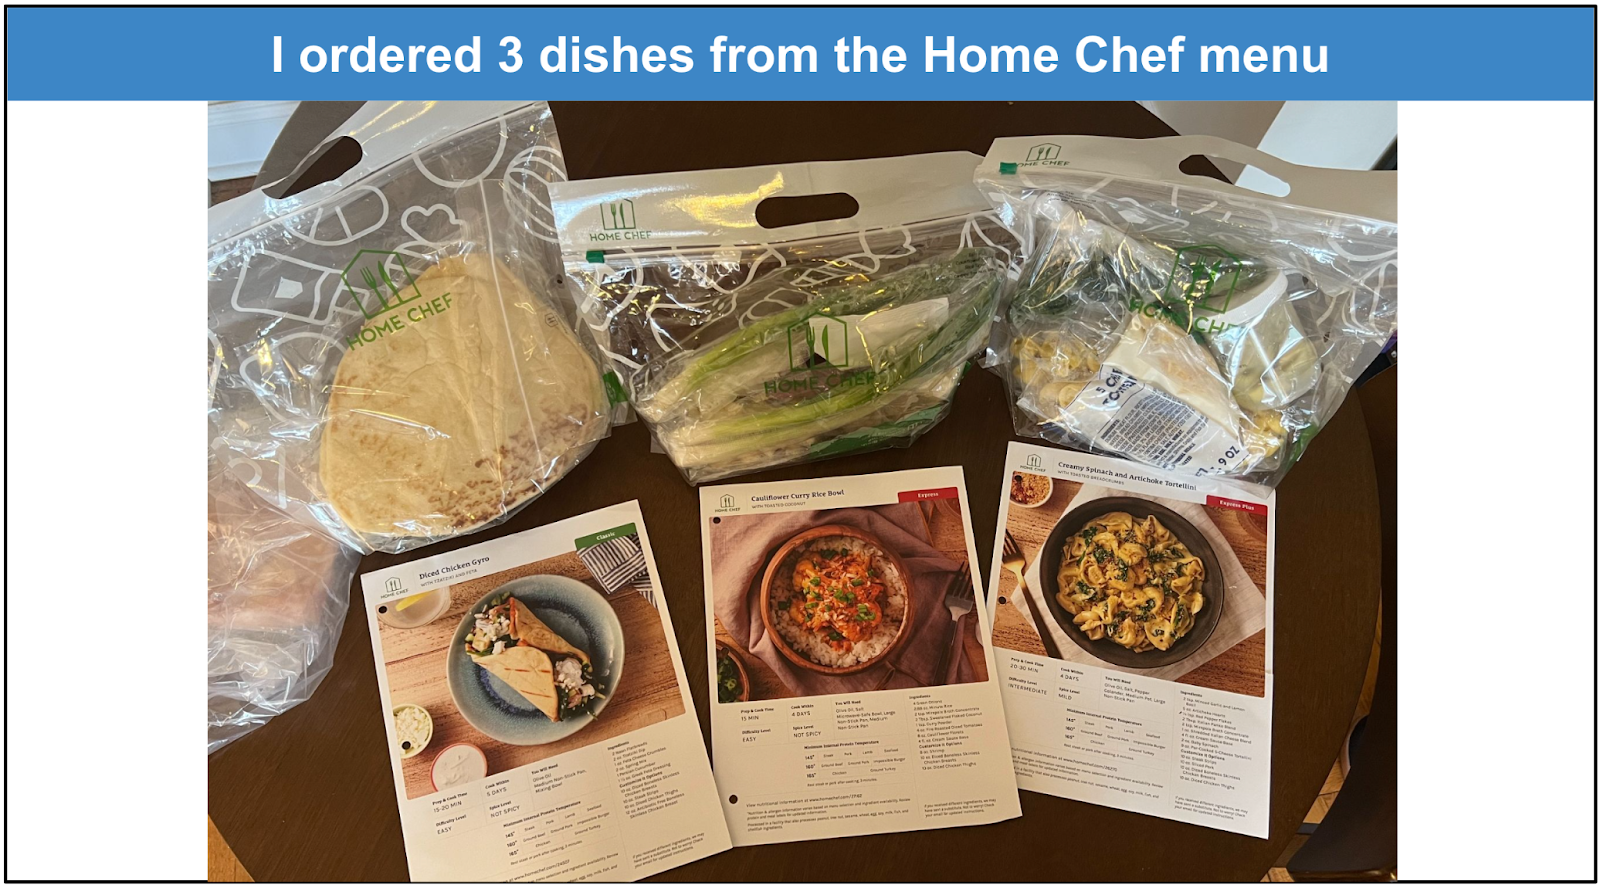 Have you Tried Home Chef Oven Ready Meal Kits?